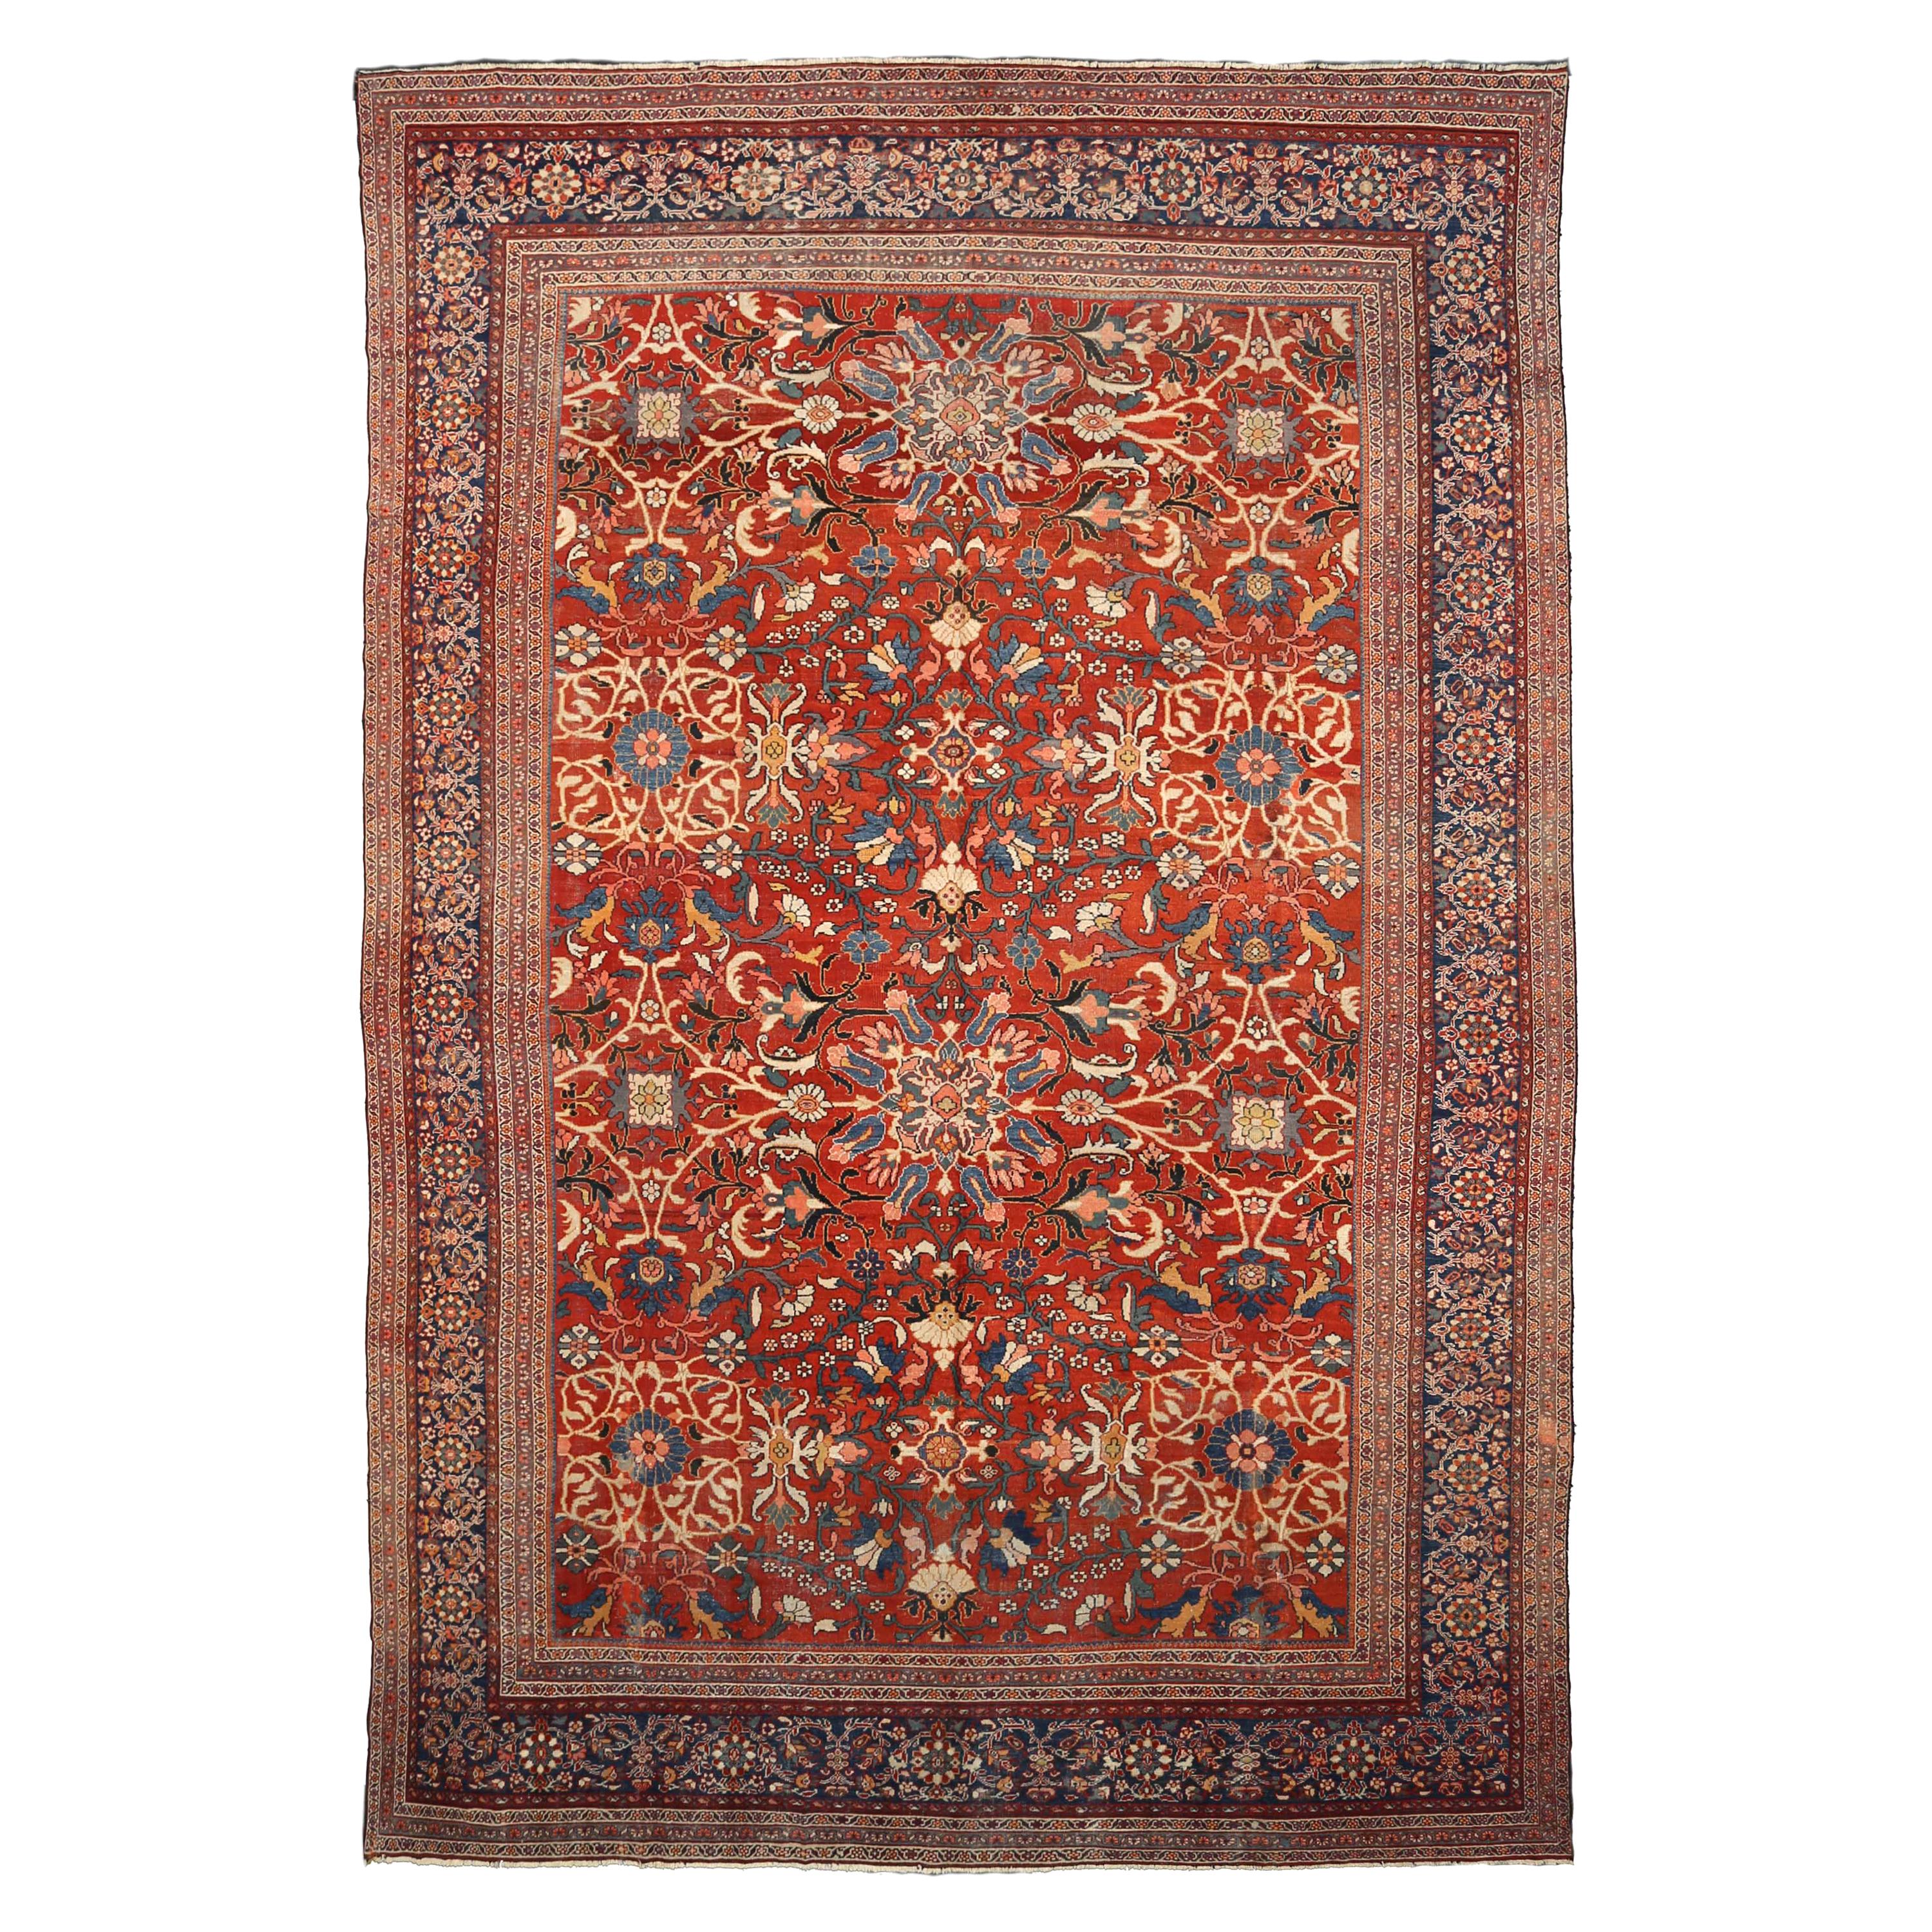 Large Antique Persian Sultanabad Area Rug Circa 1900s